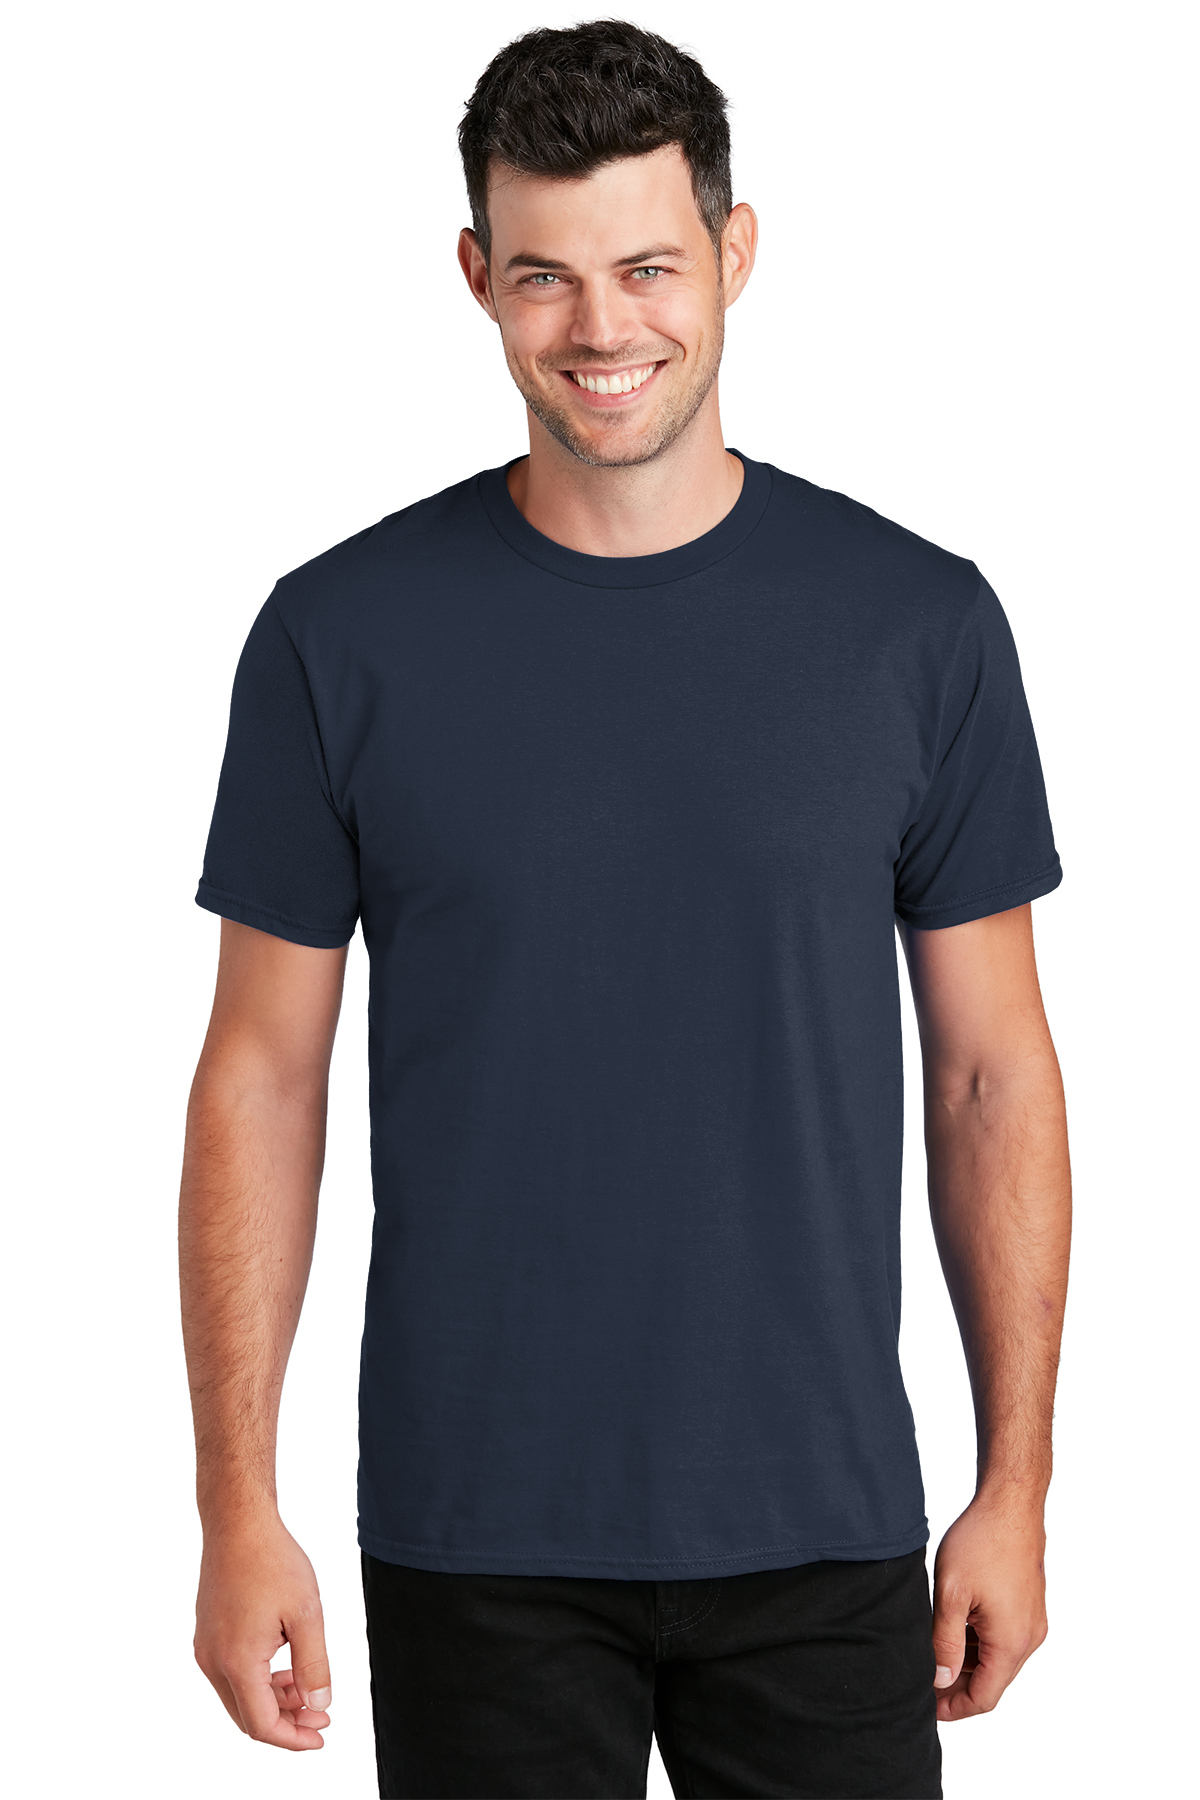 Port & Company ® Fan Favorite™ Tee | Product | Company Casuals